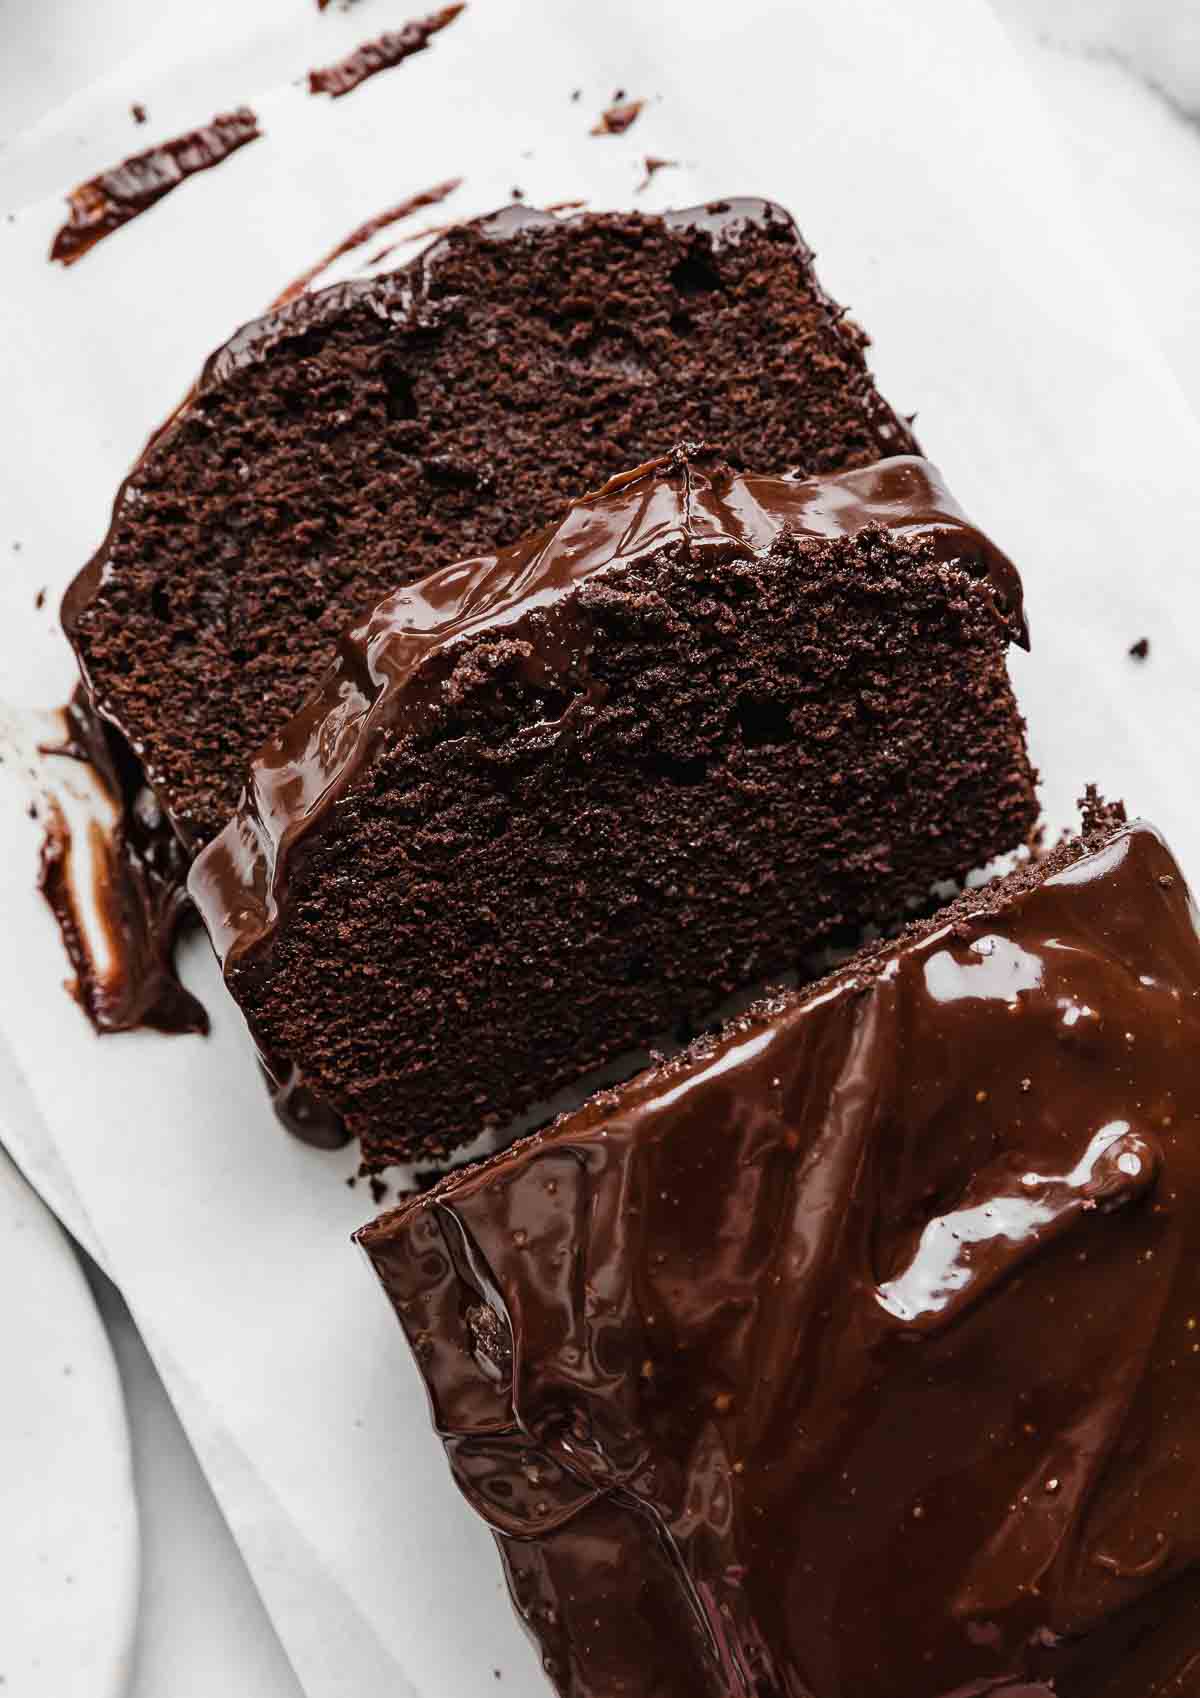 Overhead photo of a Chocolate Pound Cake cut into slices.